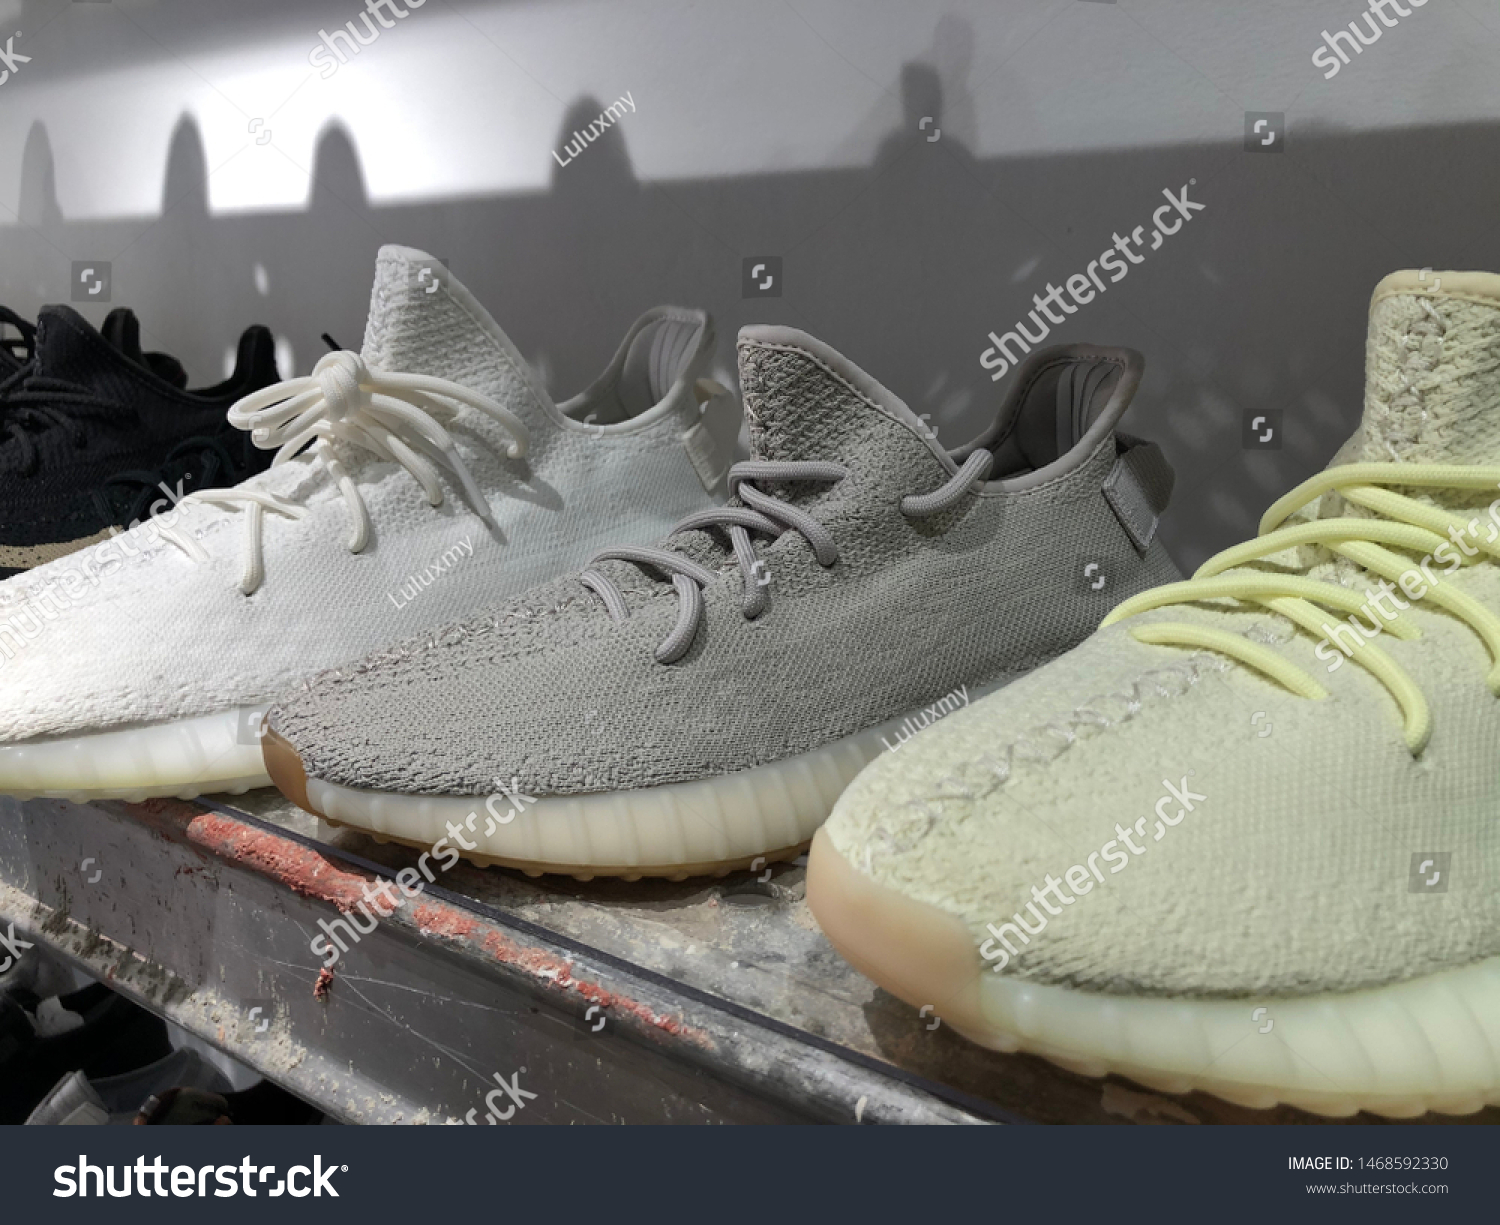 the shoes called yeezys